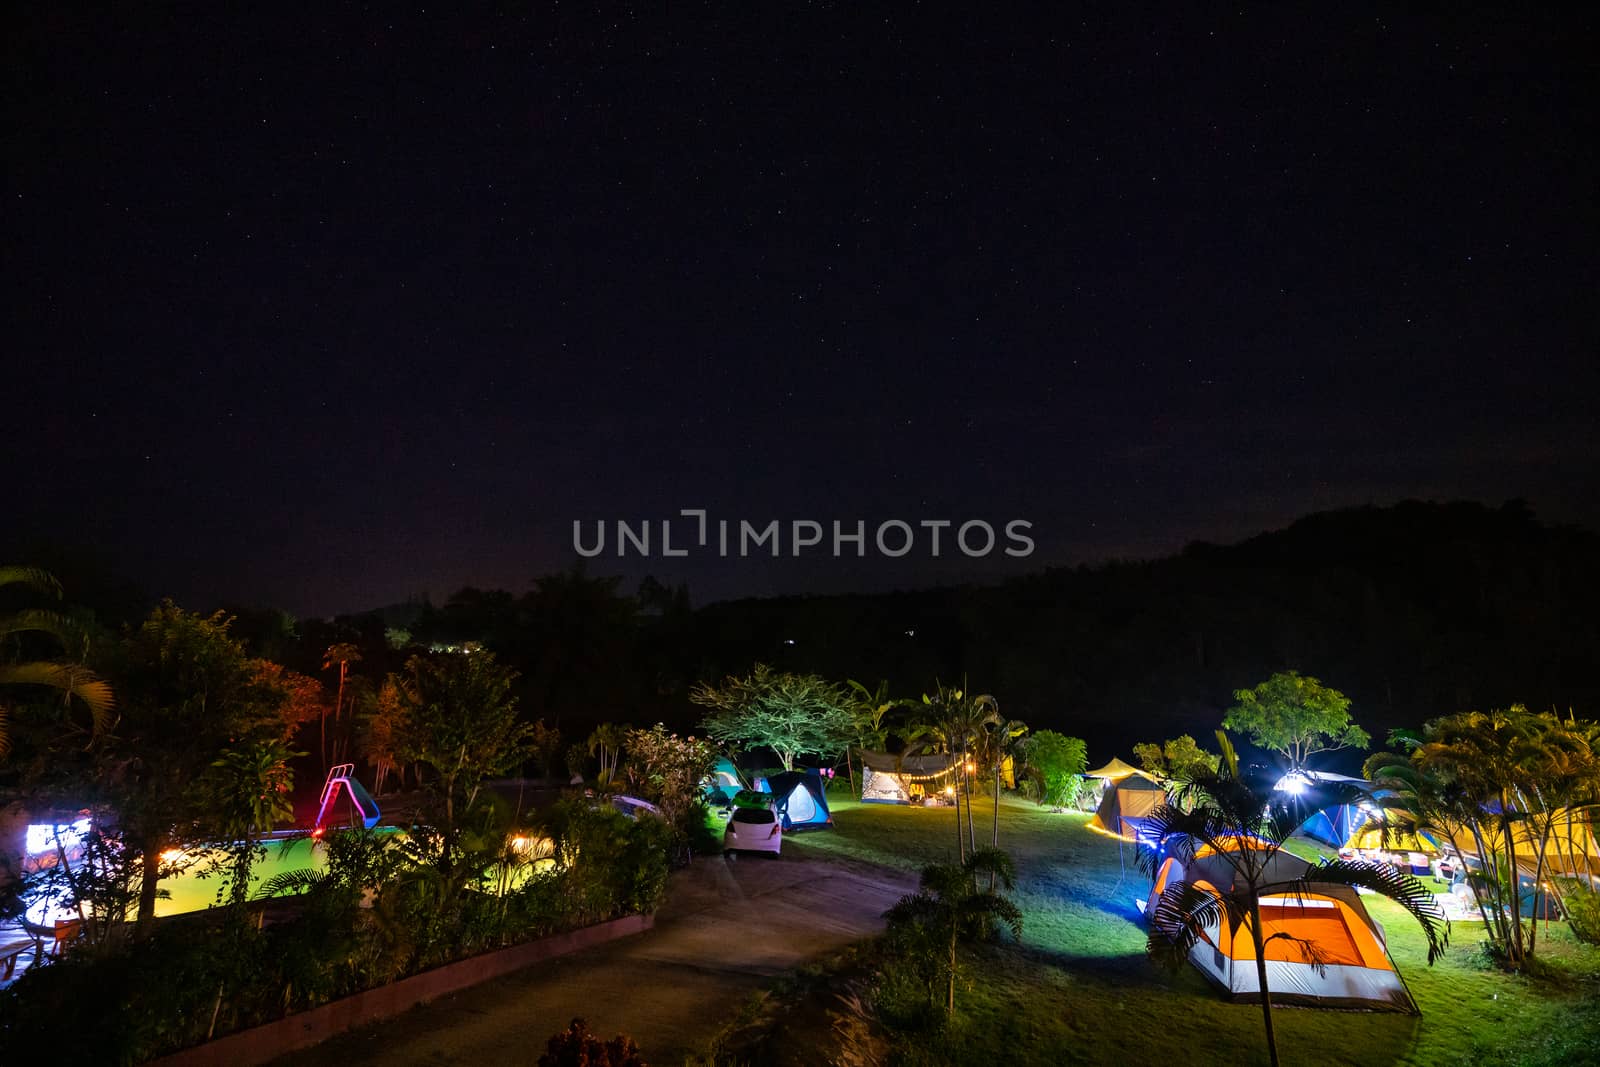 Camping and tent in nature park at night